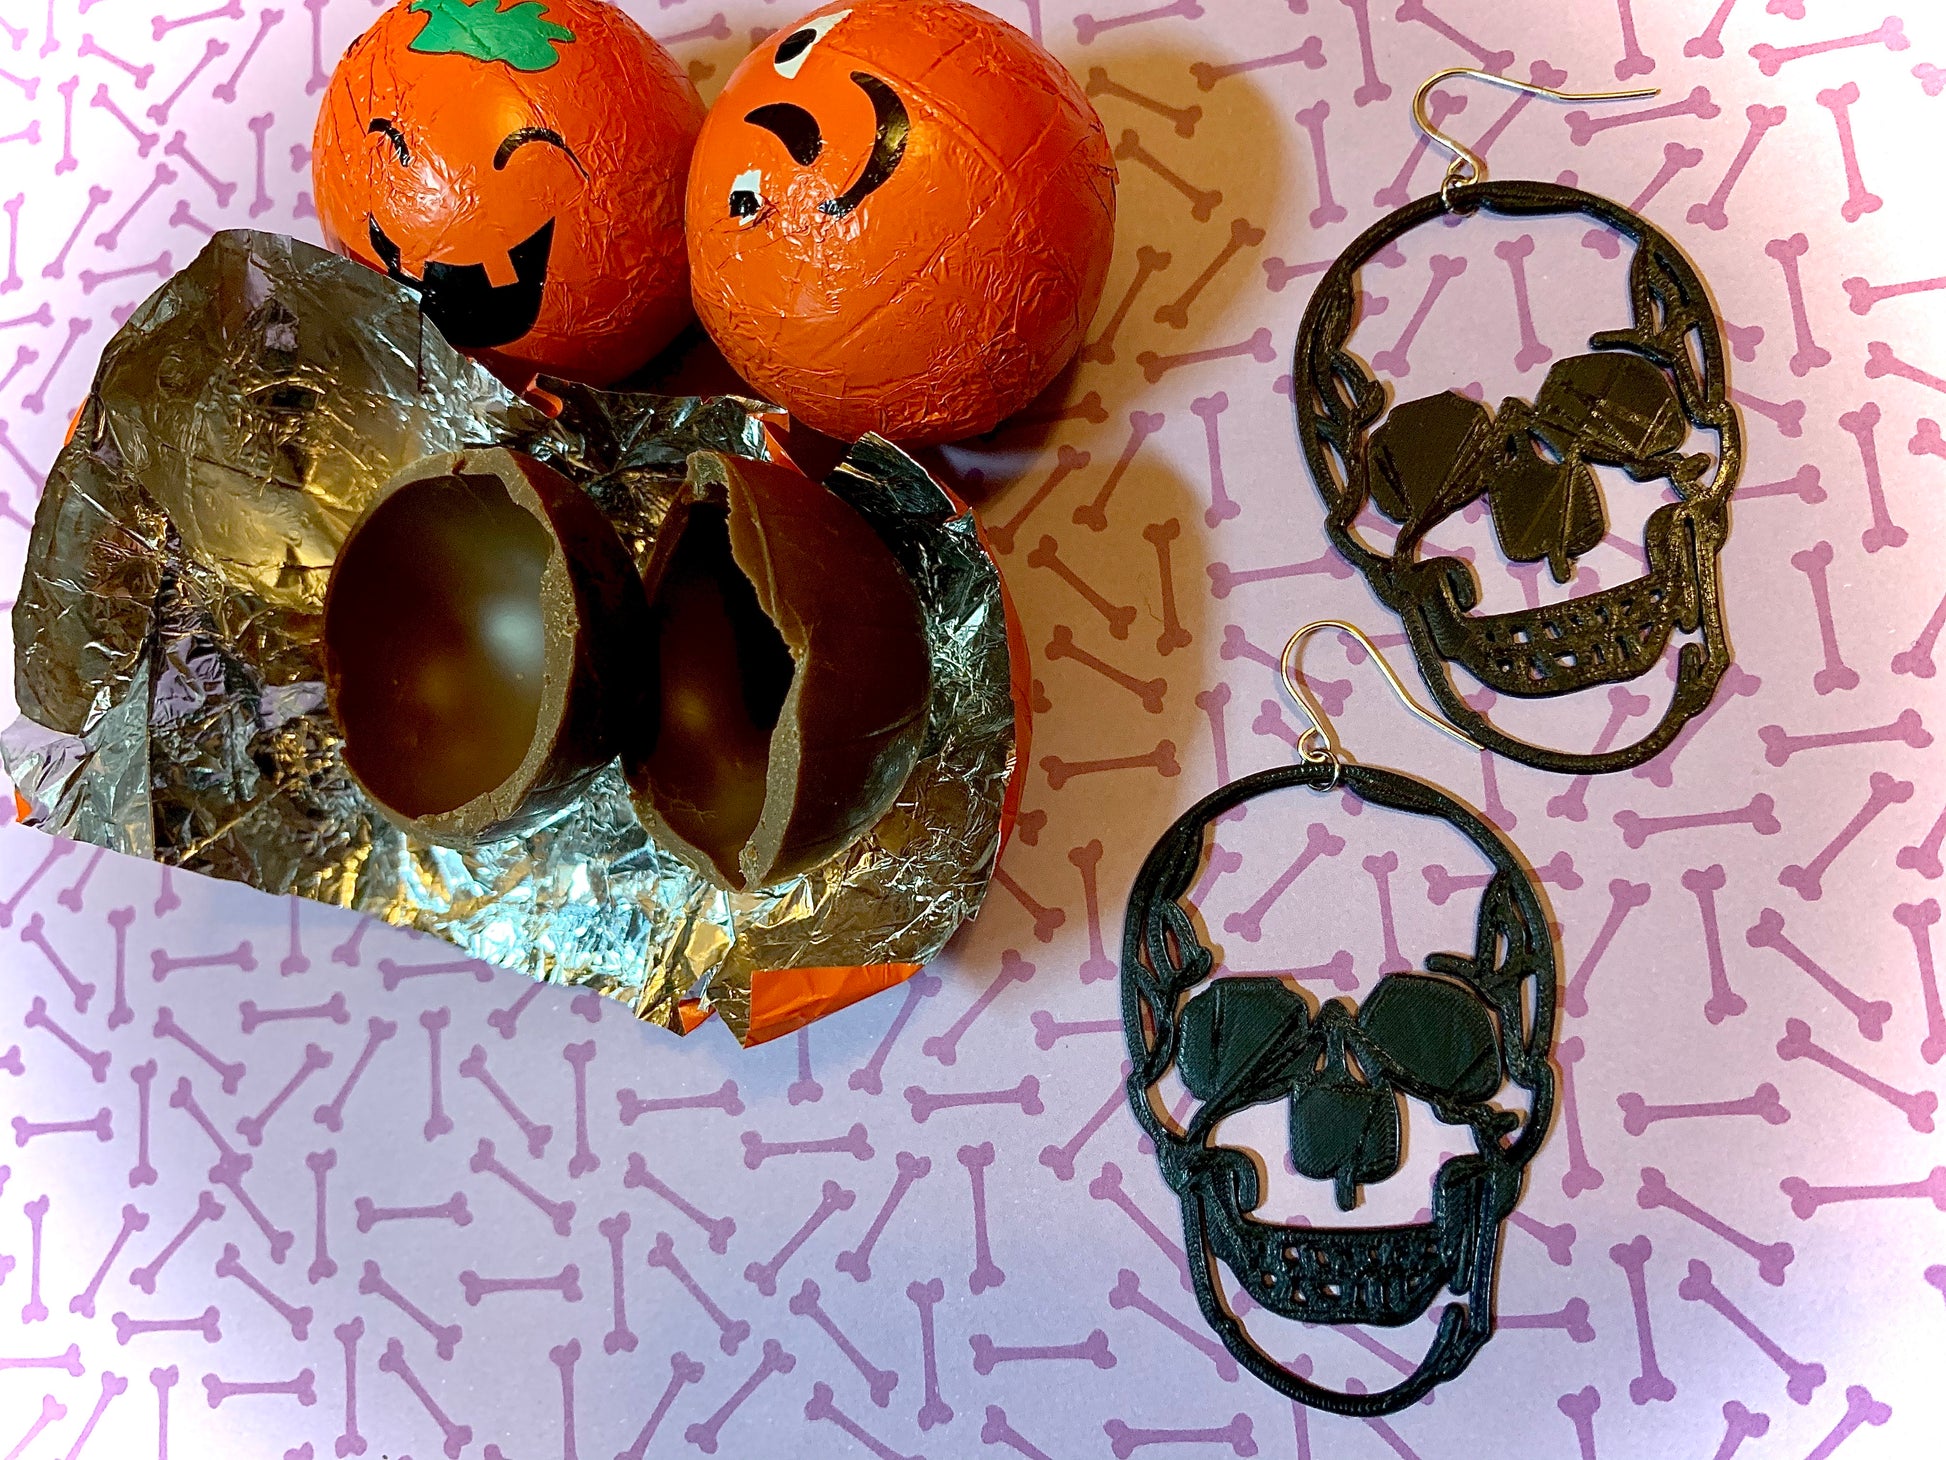 Two earrings are shown with pumpkin chocolates for halloween. The earrings are black and in the shape of two large human skulls.